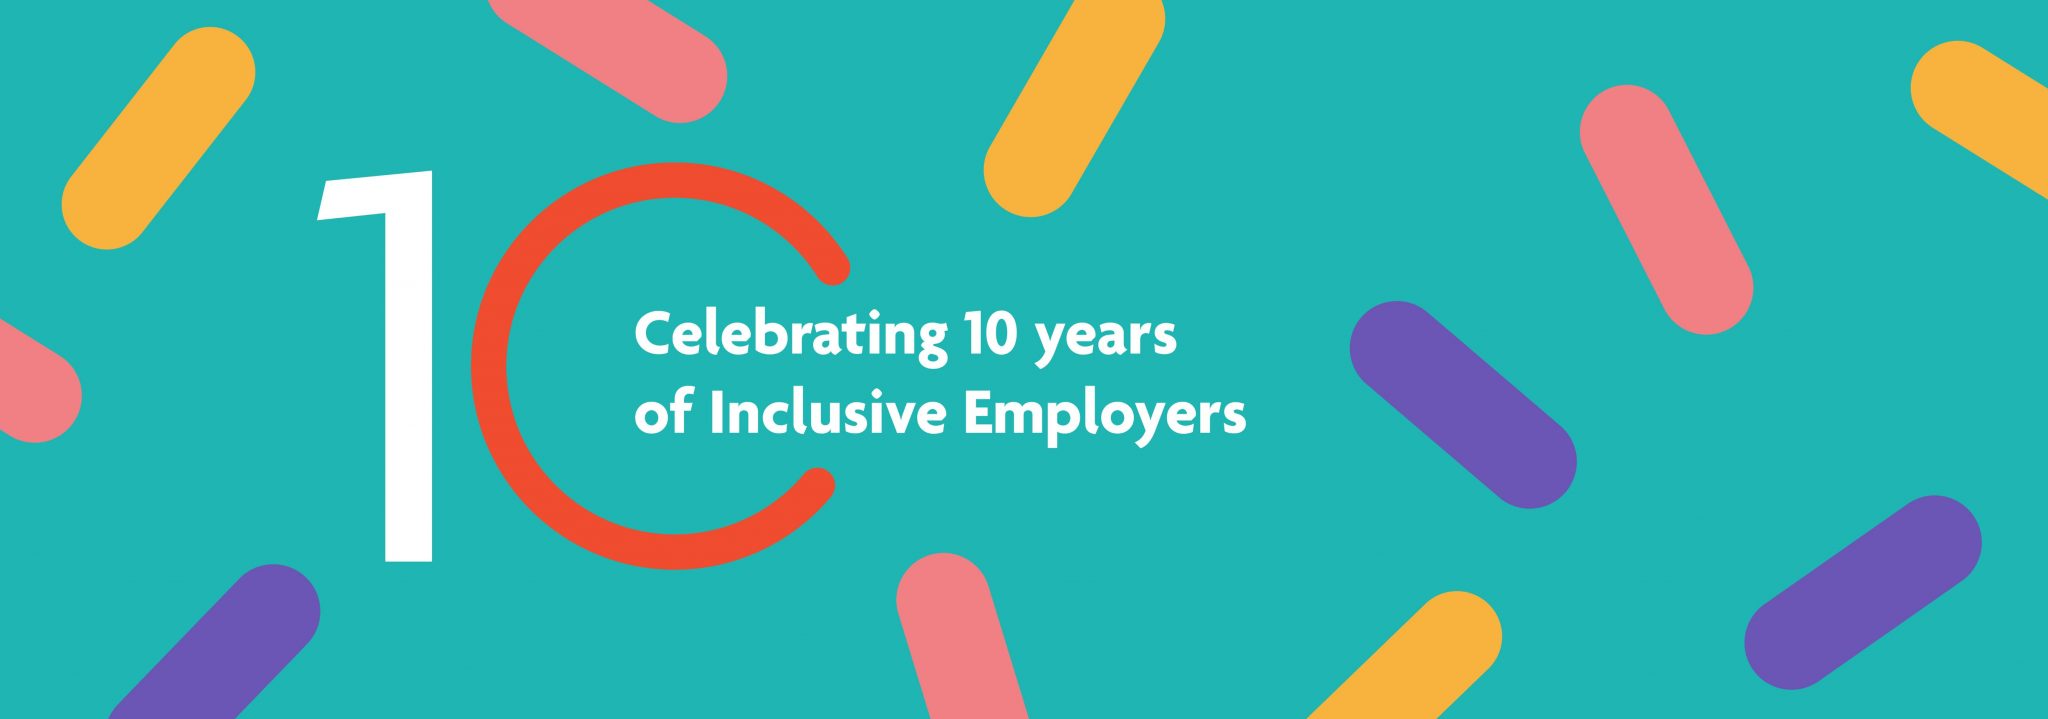 Inclusive Employers experts in diversity and inclusion